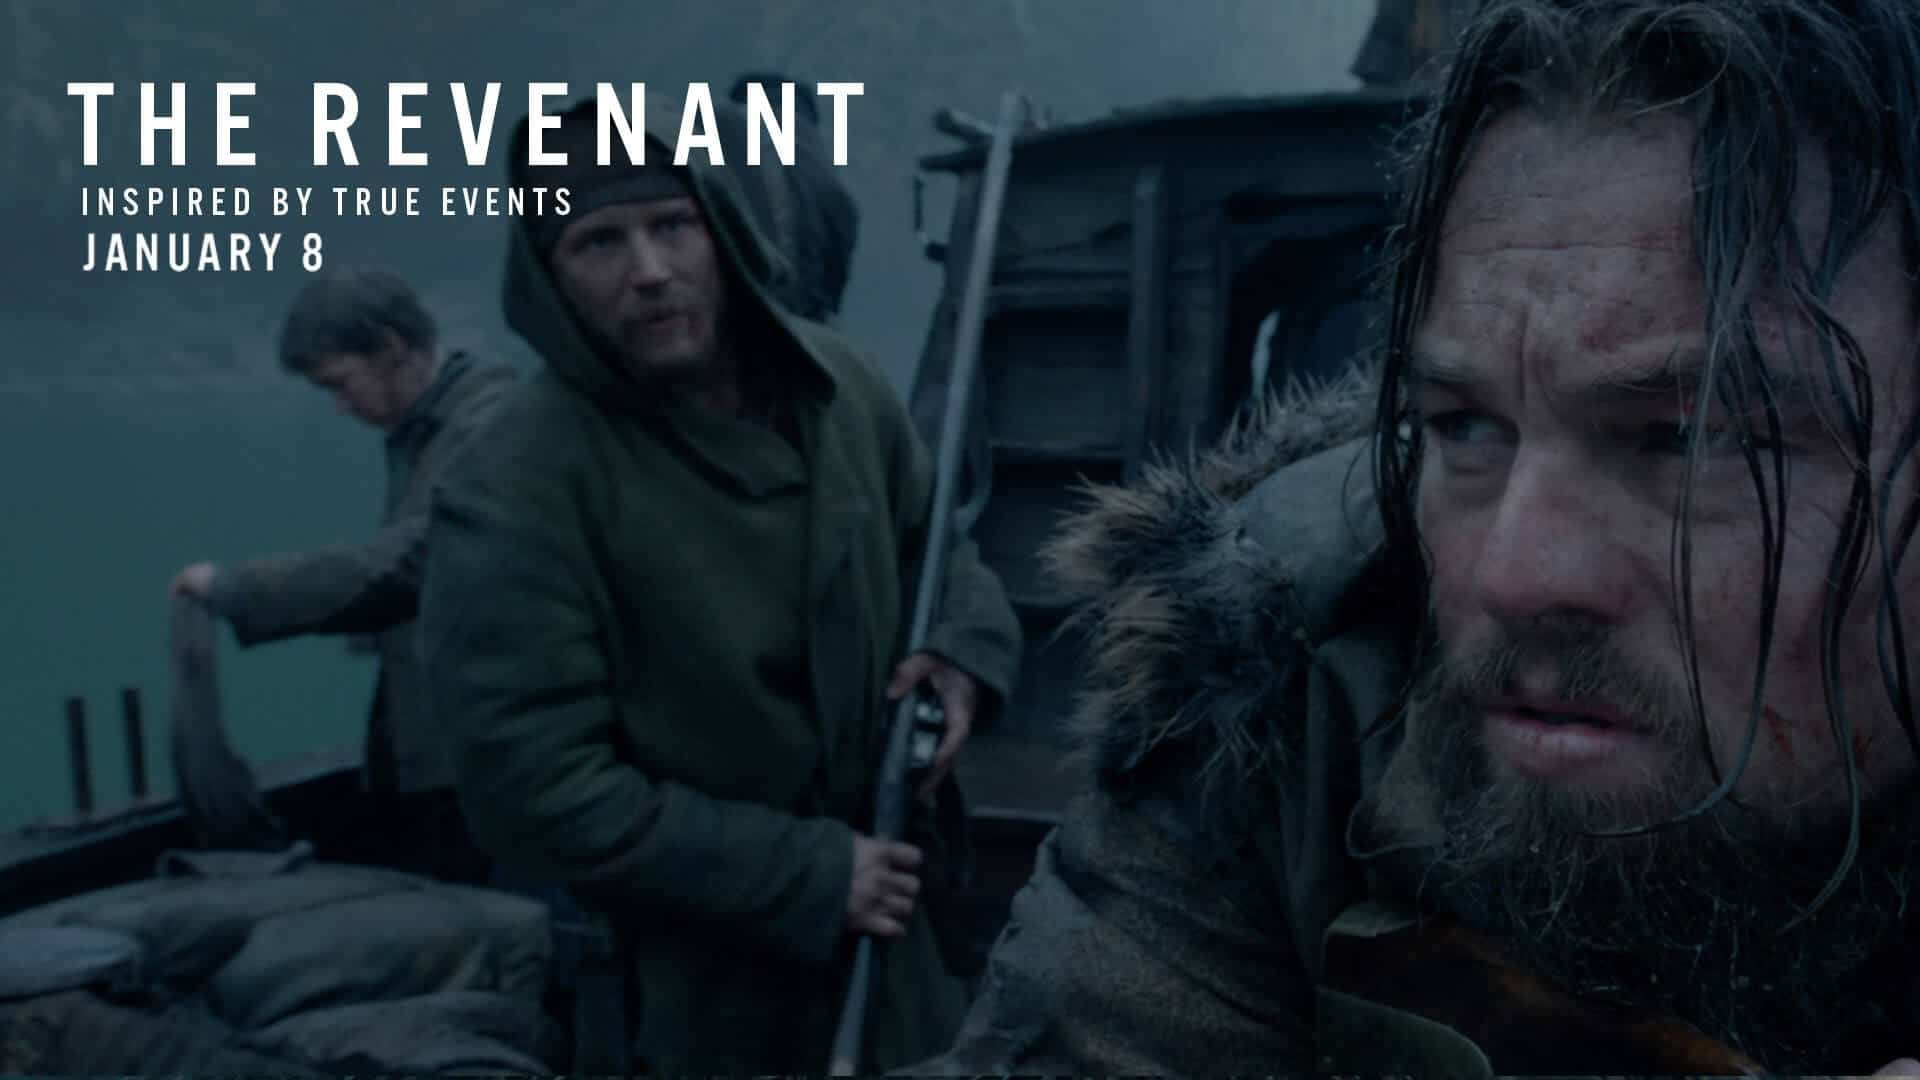 THE REVENANT – The one who comes back from the dead, and whose tale takes your breath away